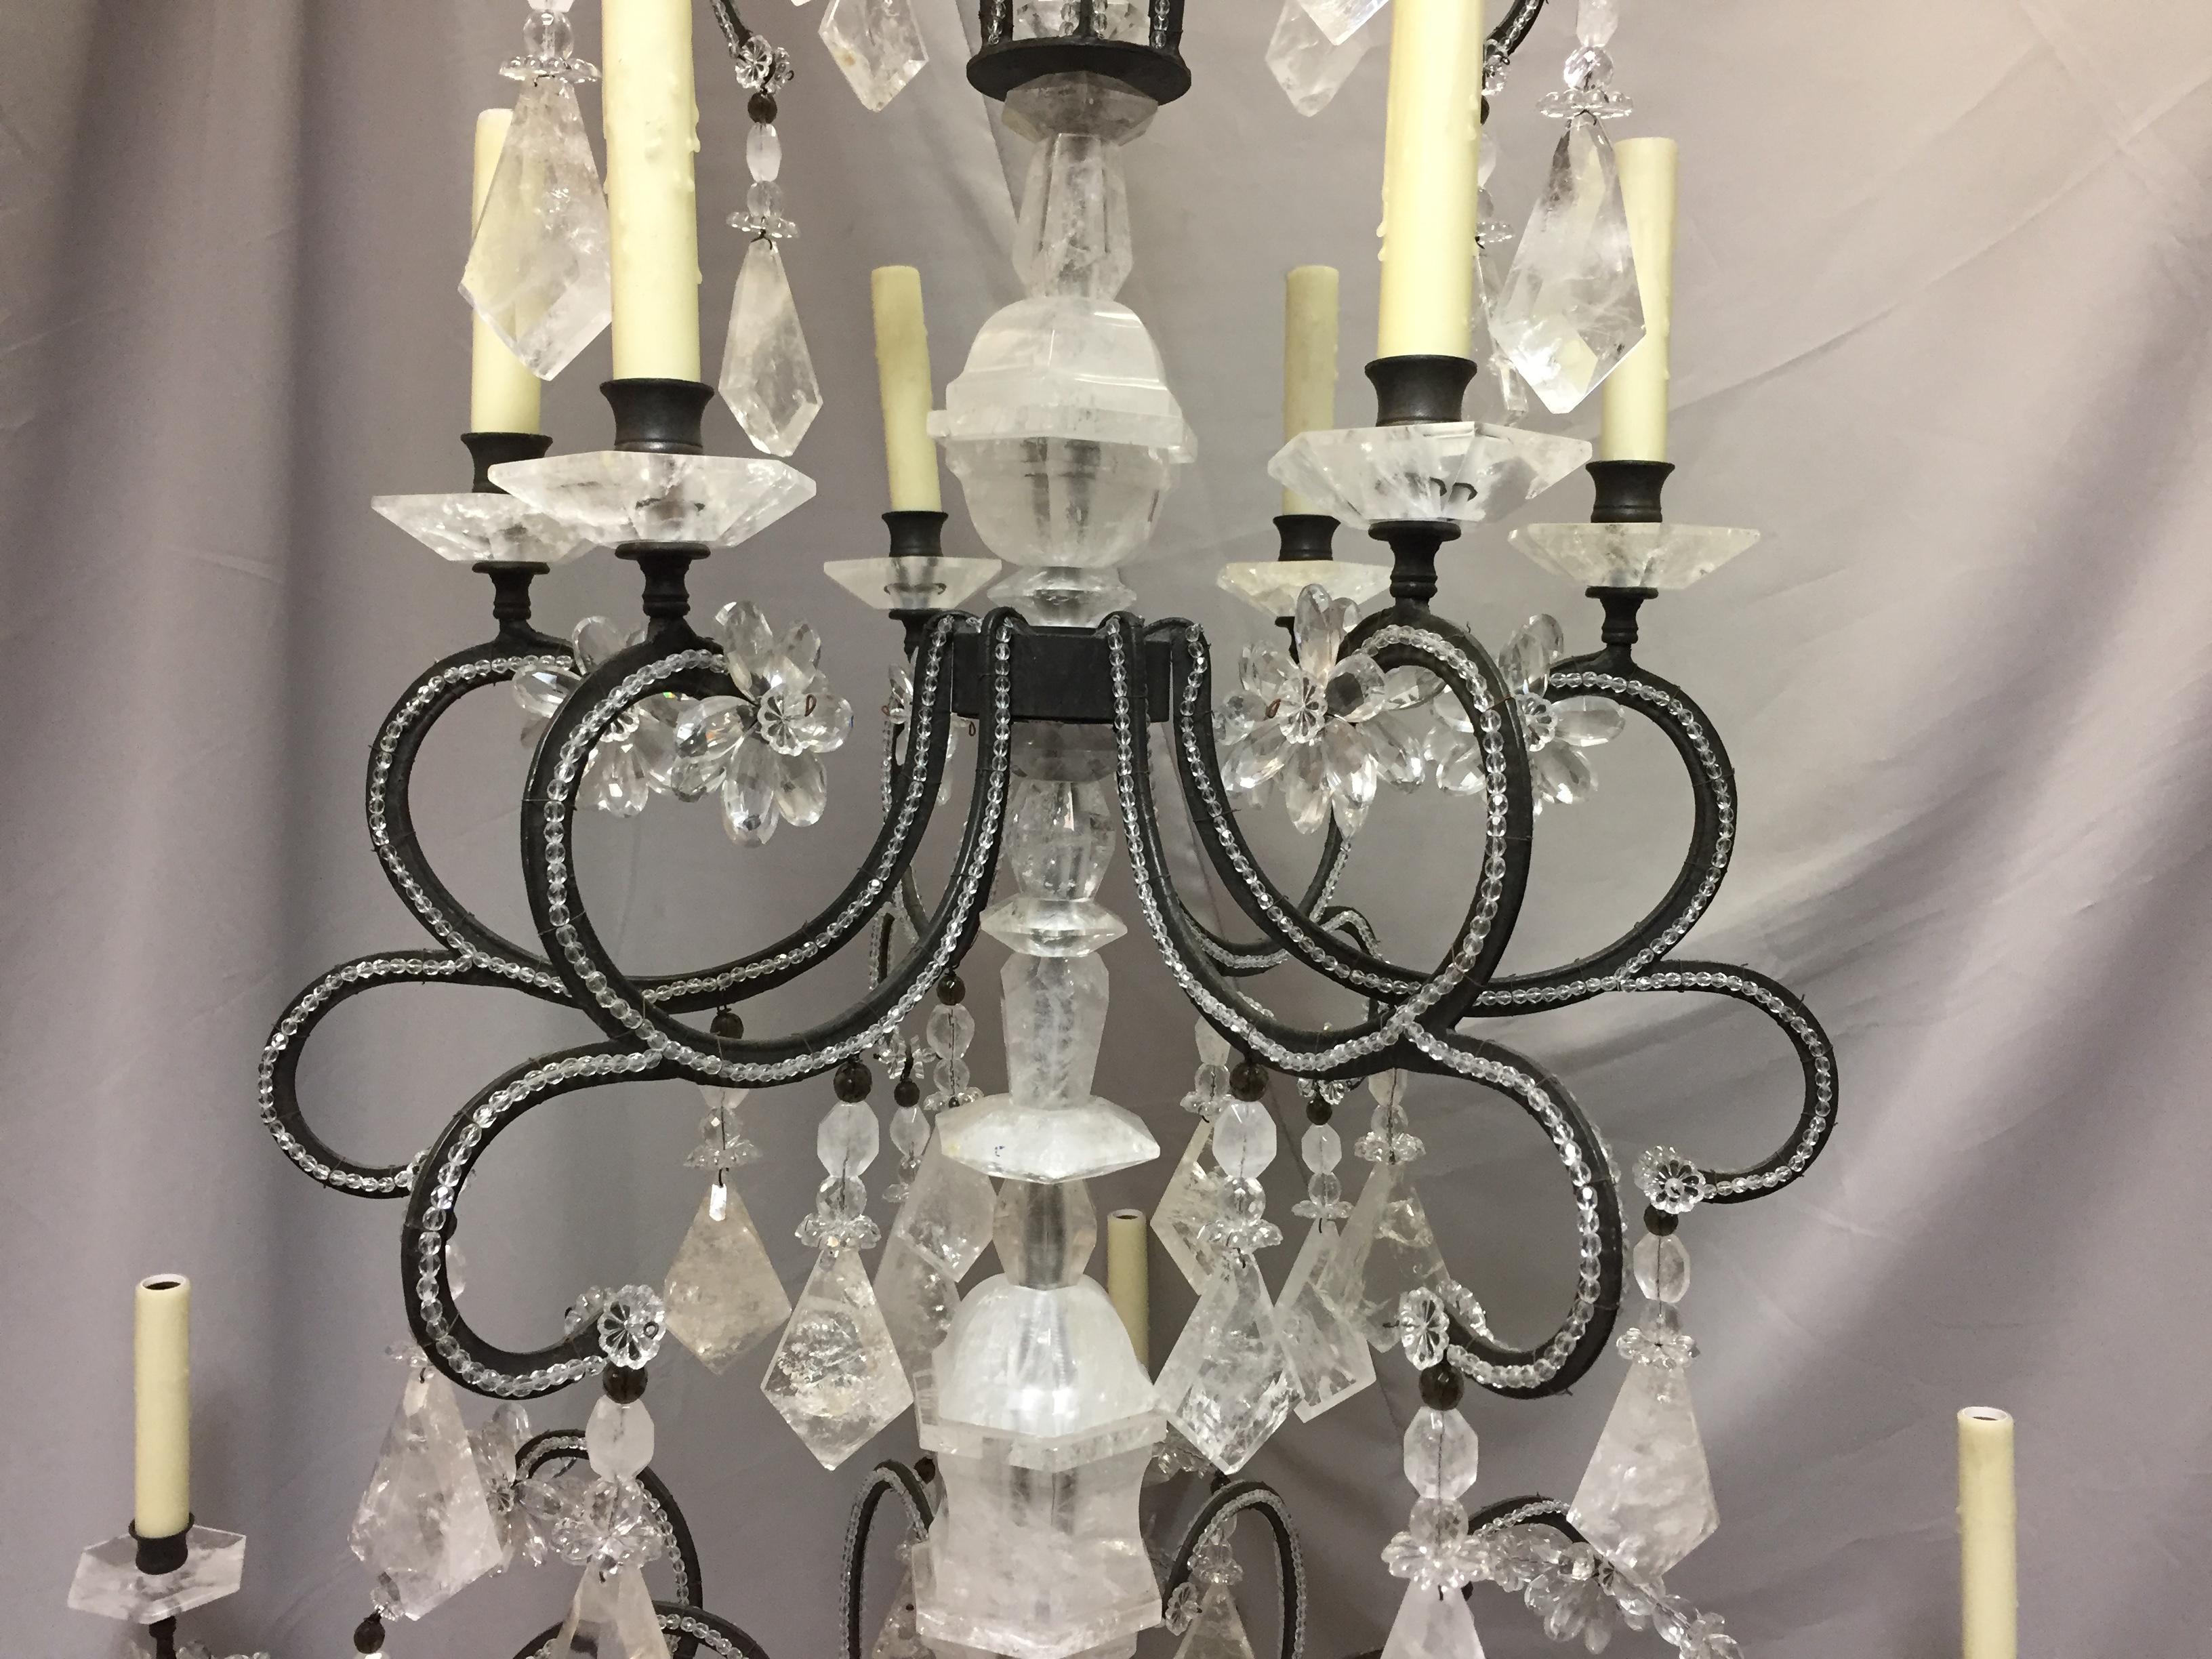 Outstanding and elegant neoclassical style hand forged wrought iron 12-light chandelier, dressed with hand carved and hand polished fine rock crystal prisms, all arms are beautifully beaded.
Also enhanced with rock crystal Bobesches. Meticulous